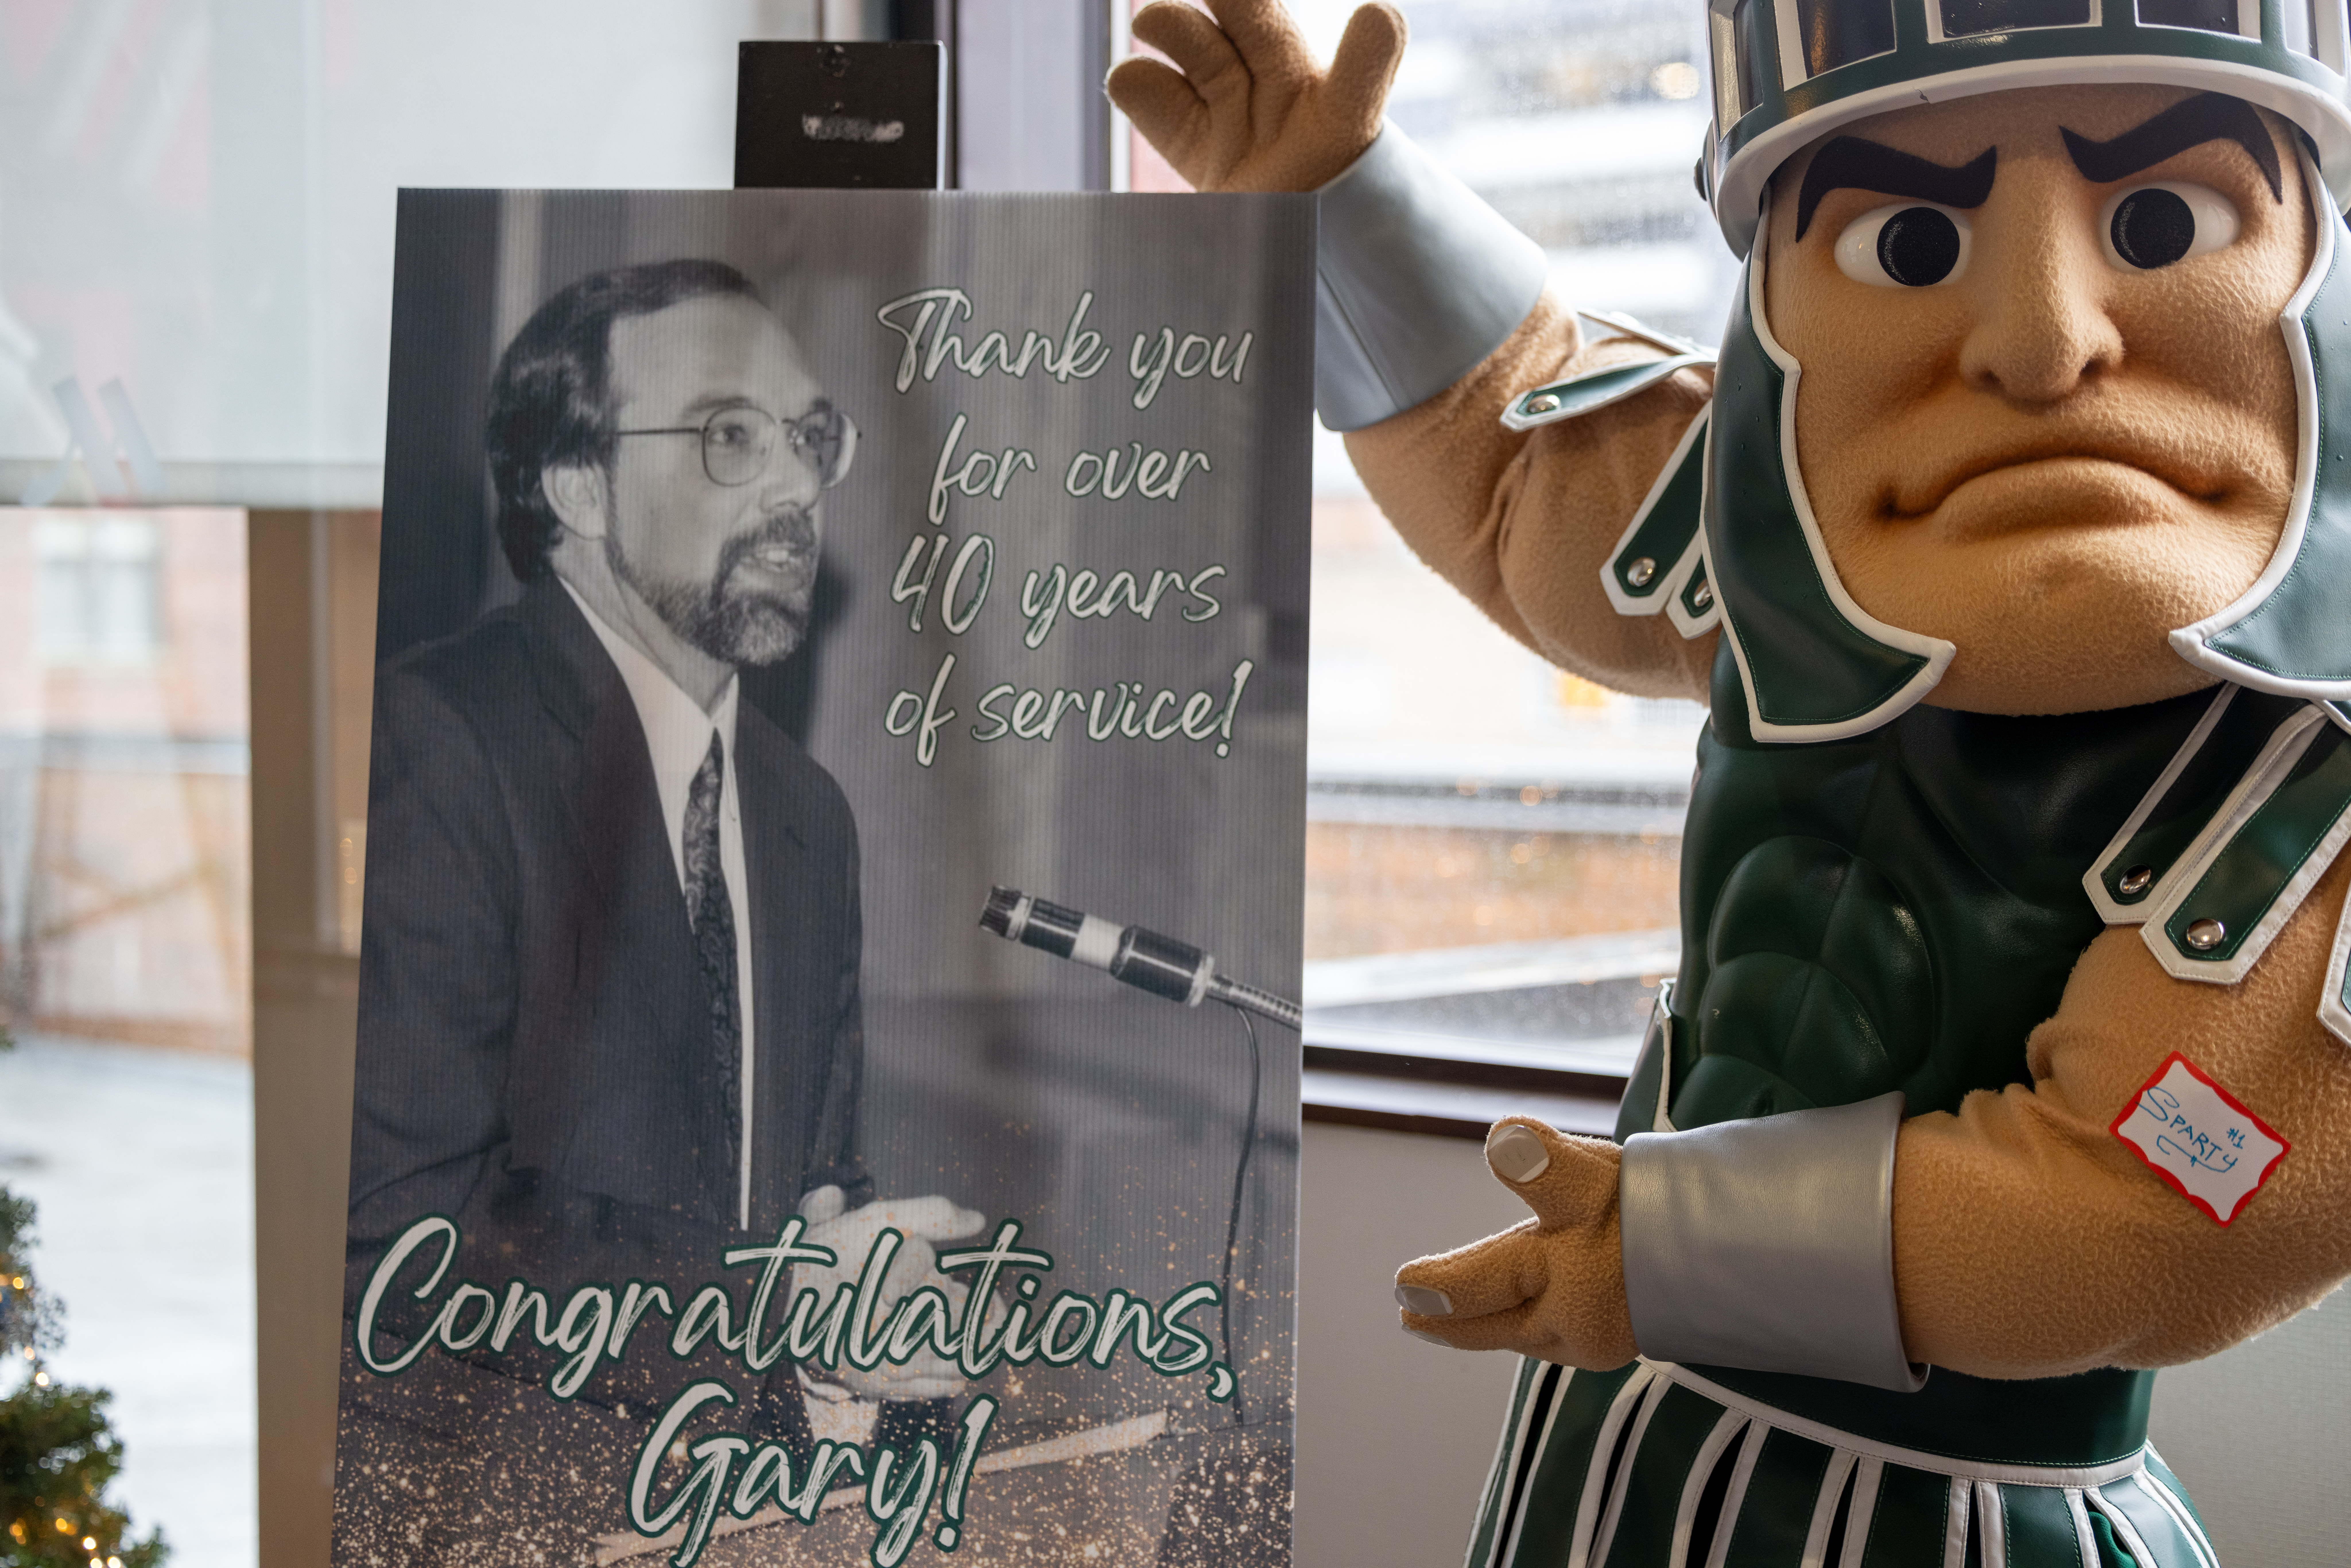 Gary Anderson's retirement photo and Sparty